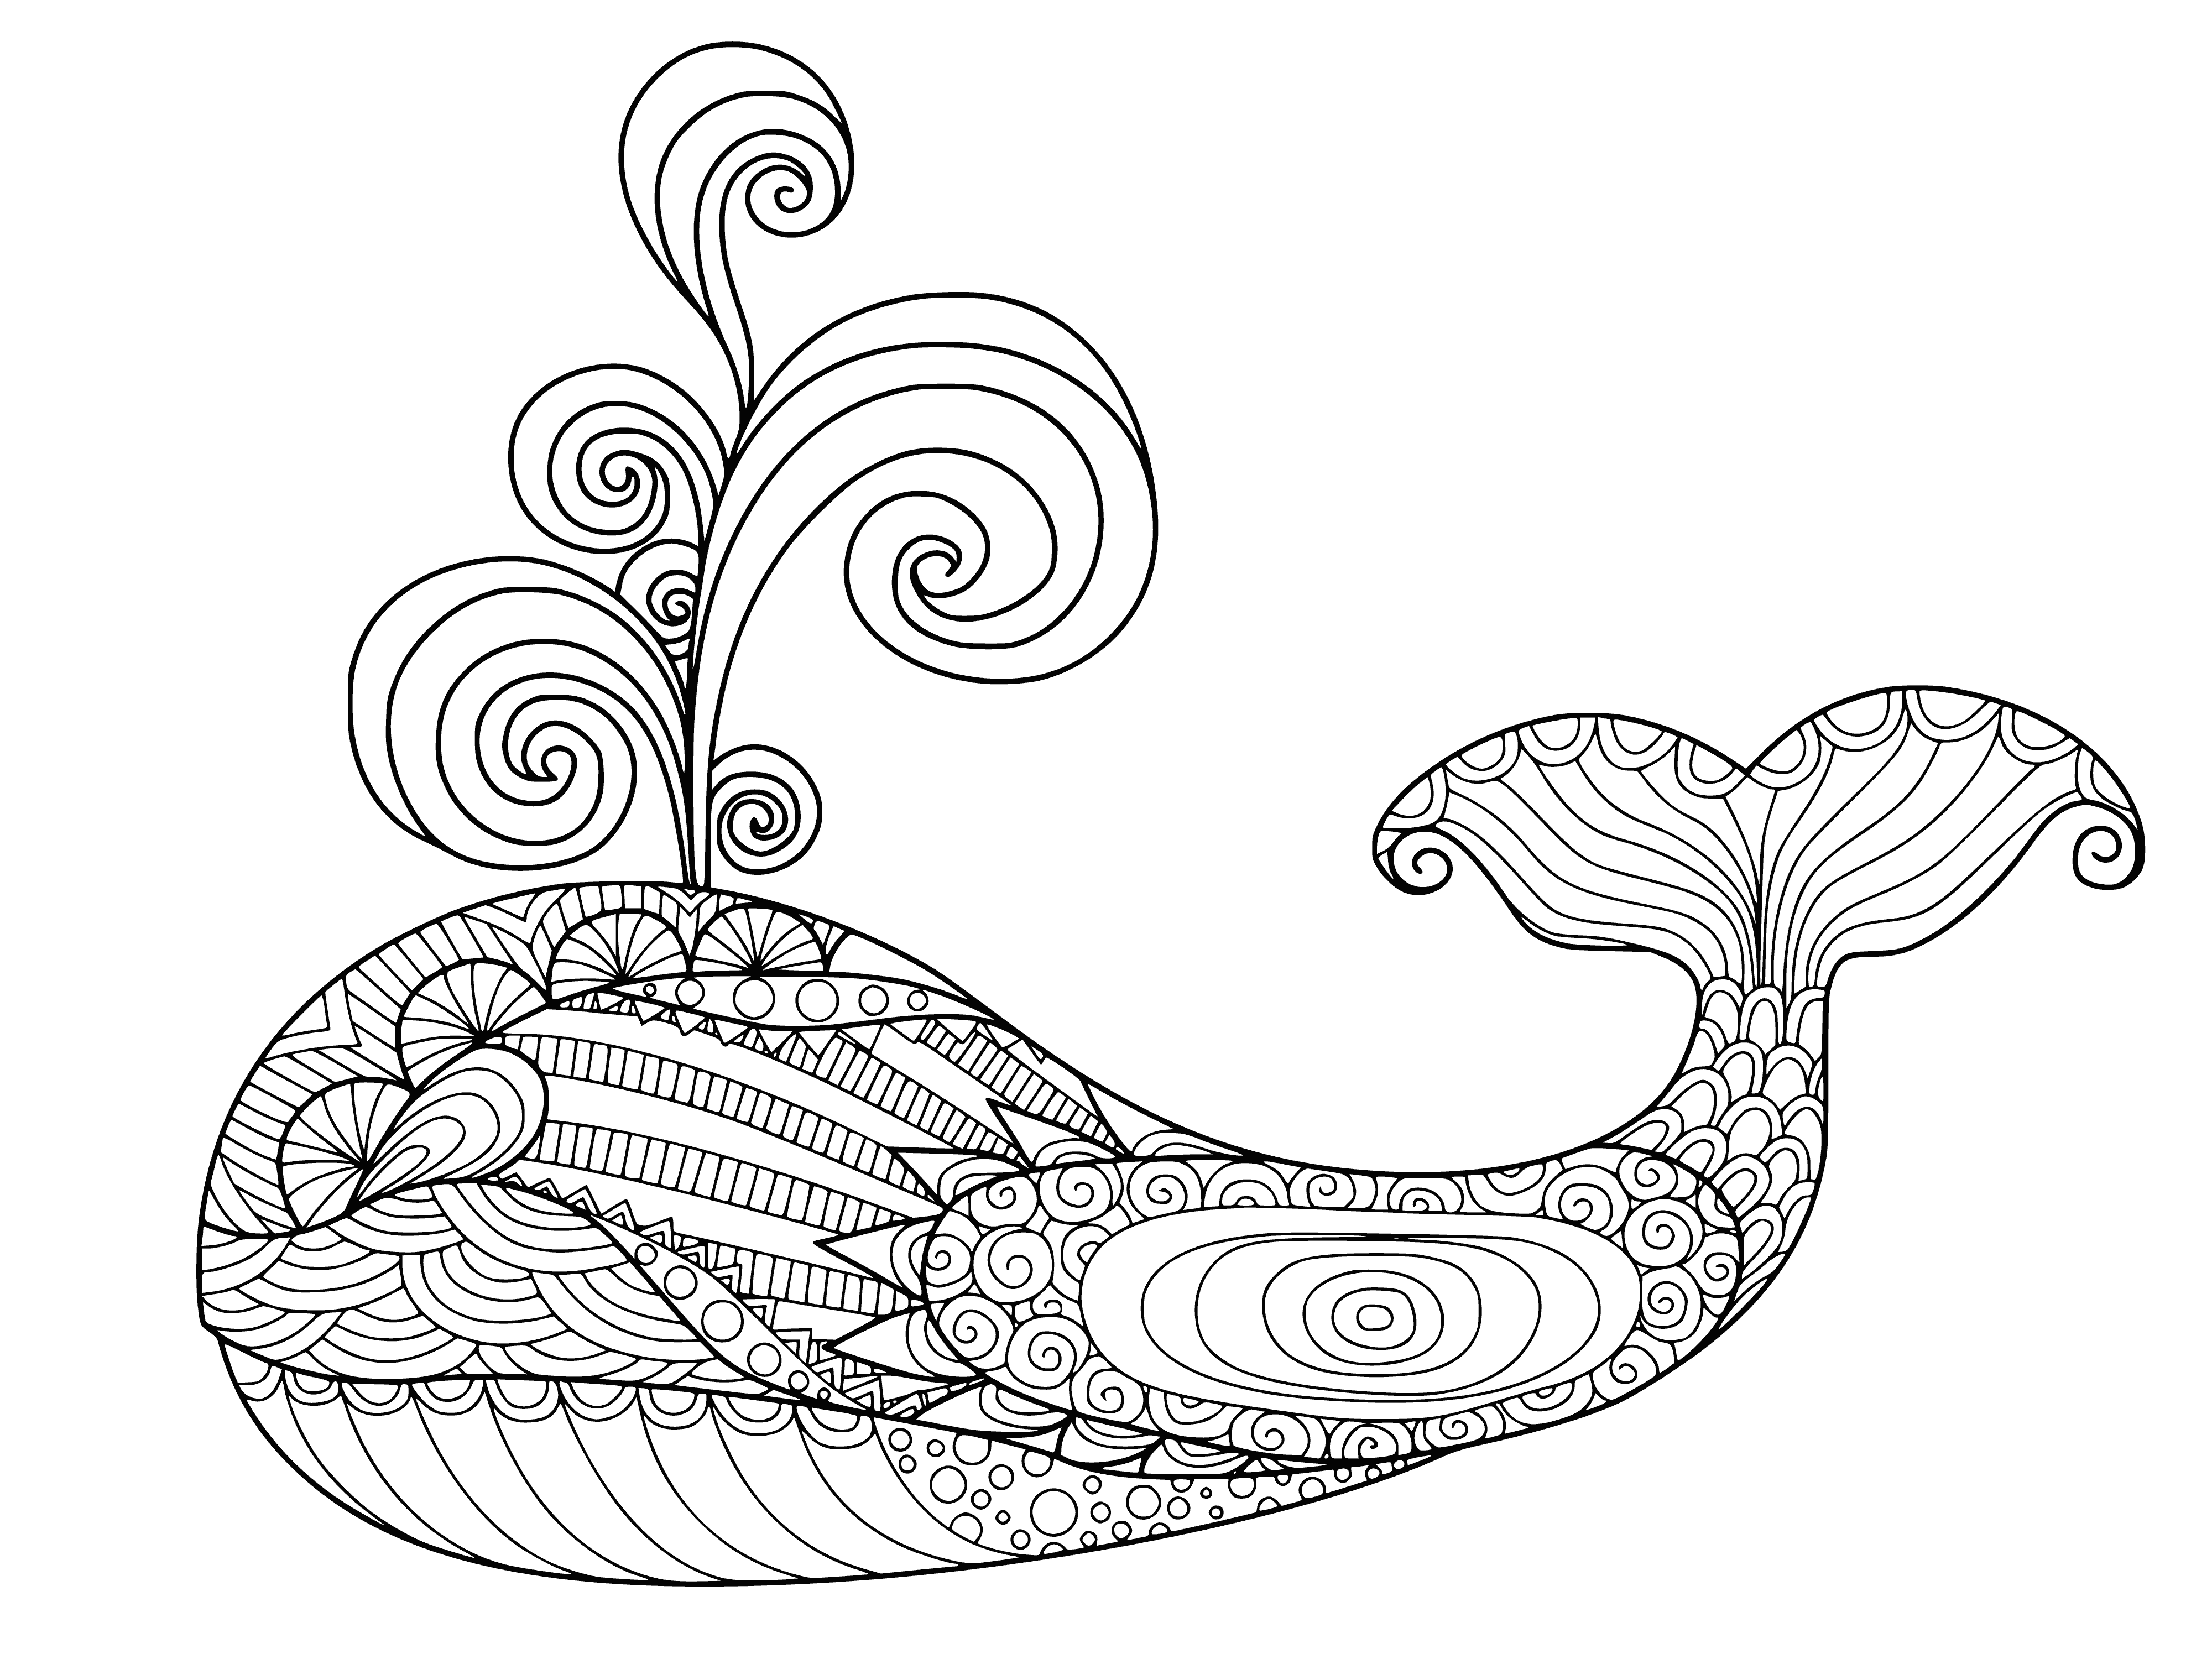 coloring page: Coloring kit w/ sea scene & plenty of fish, seagulls, & dolphins - perfect for relaxation & reducing stress.